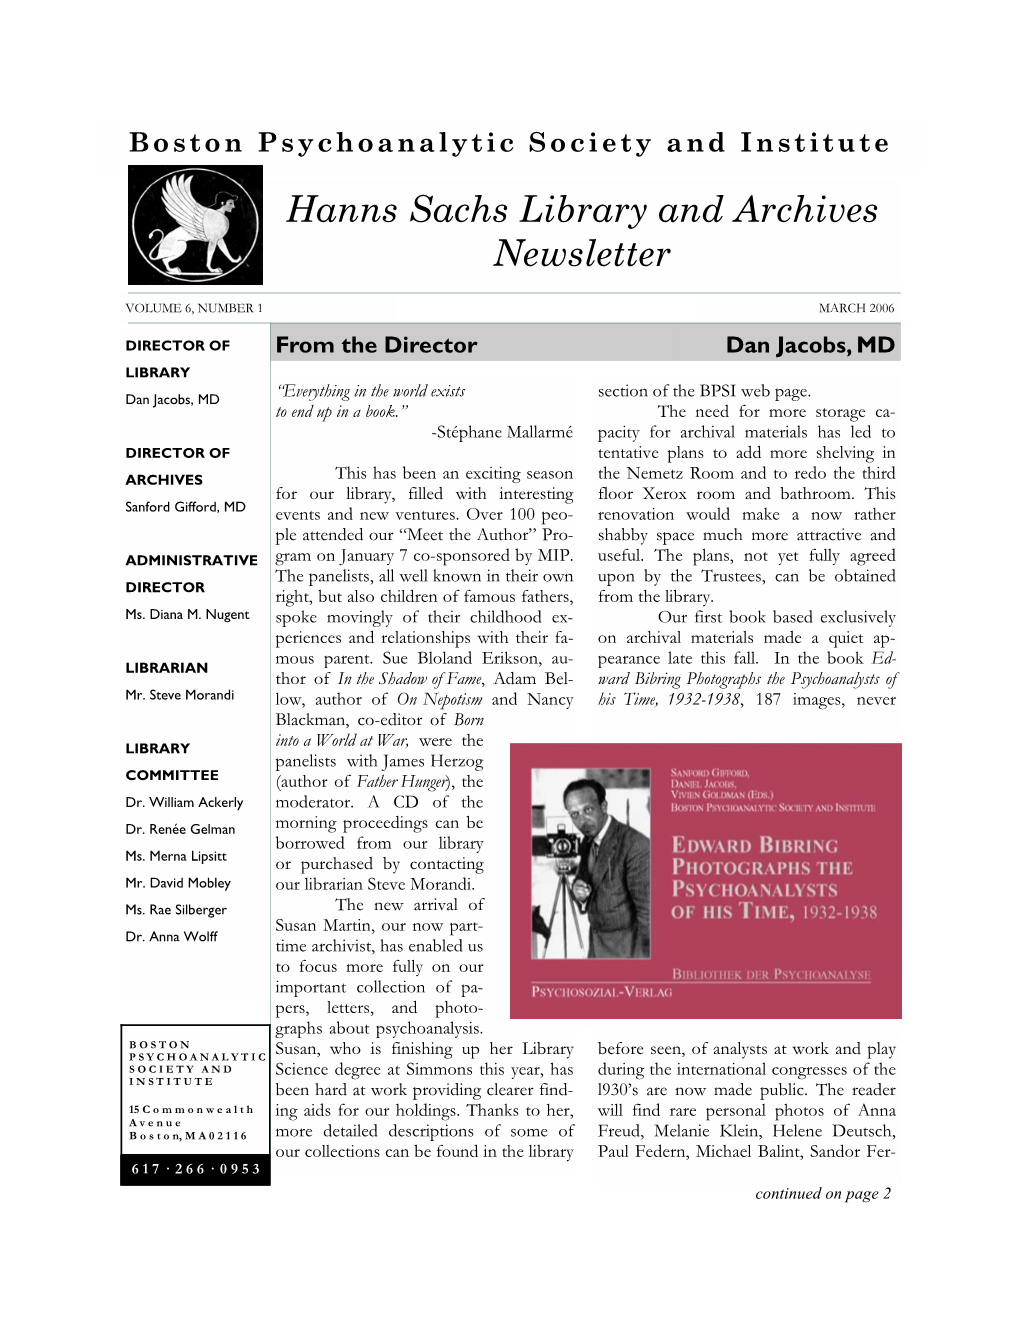 Library Newsletter March 2006